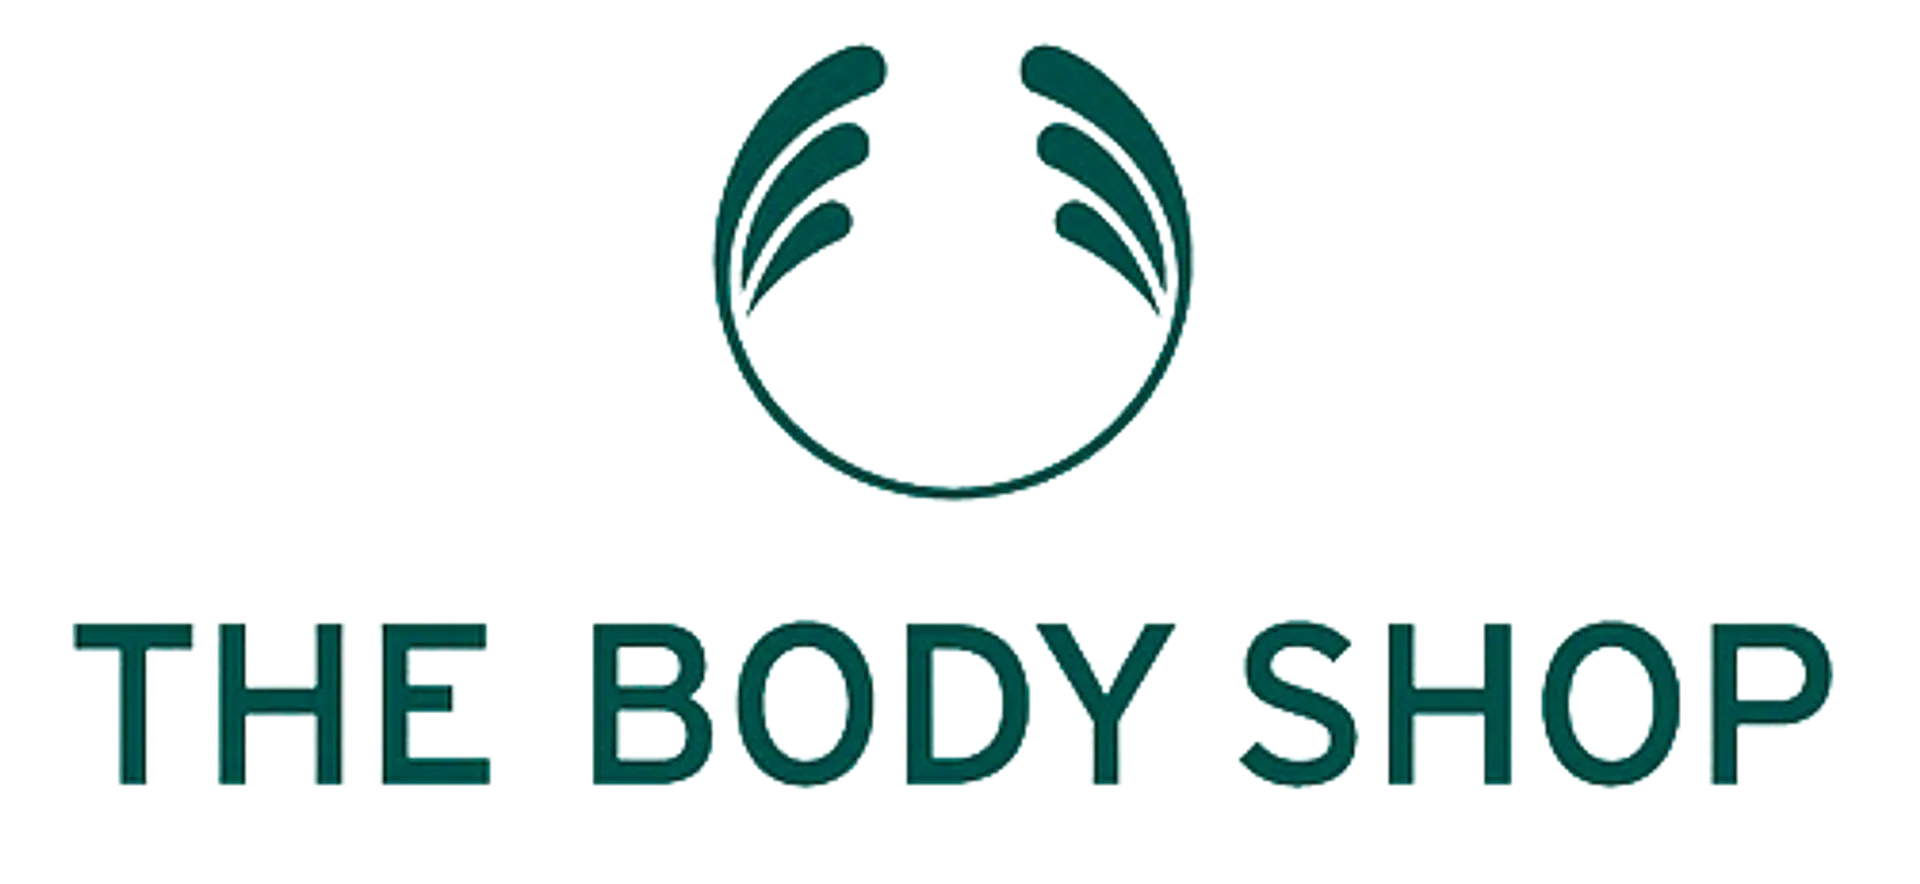 THE BODY SHOP logo current weekly ad